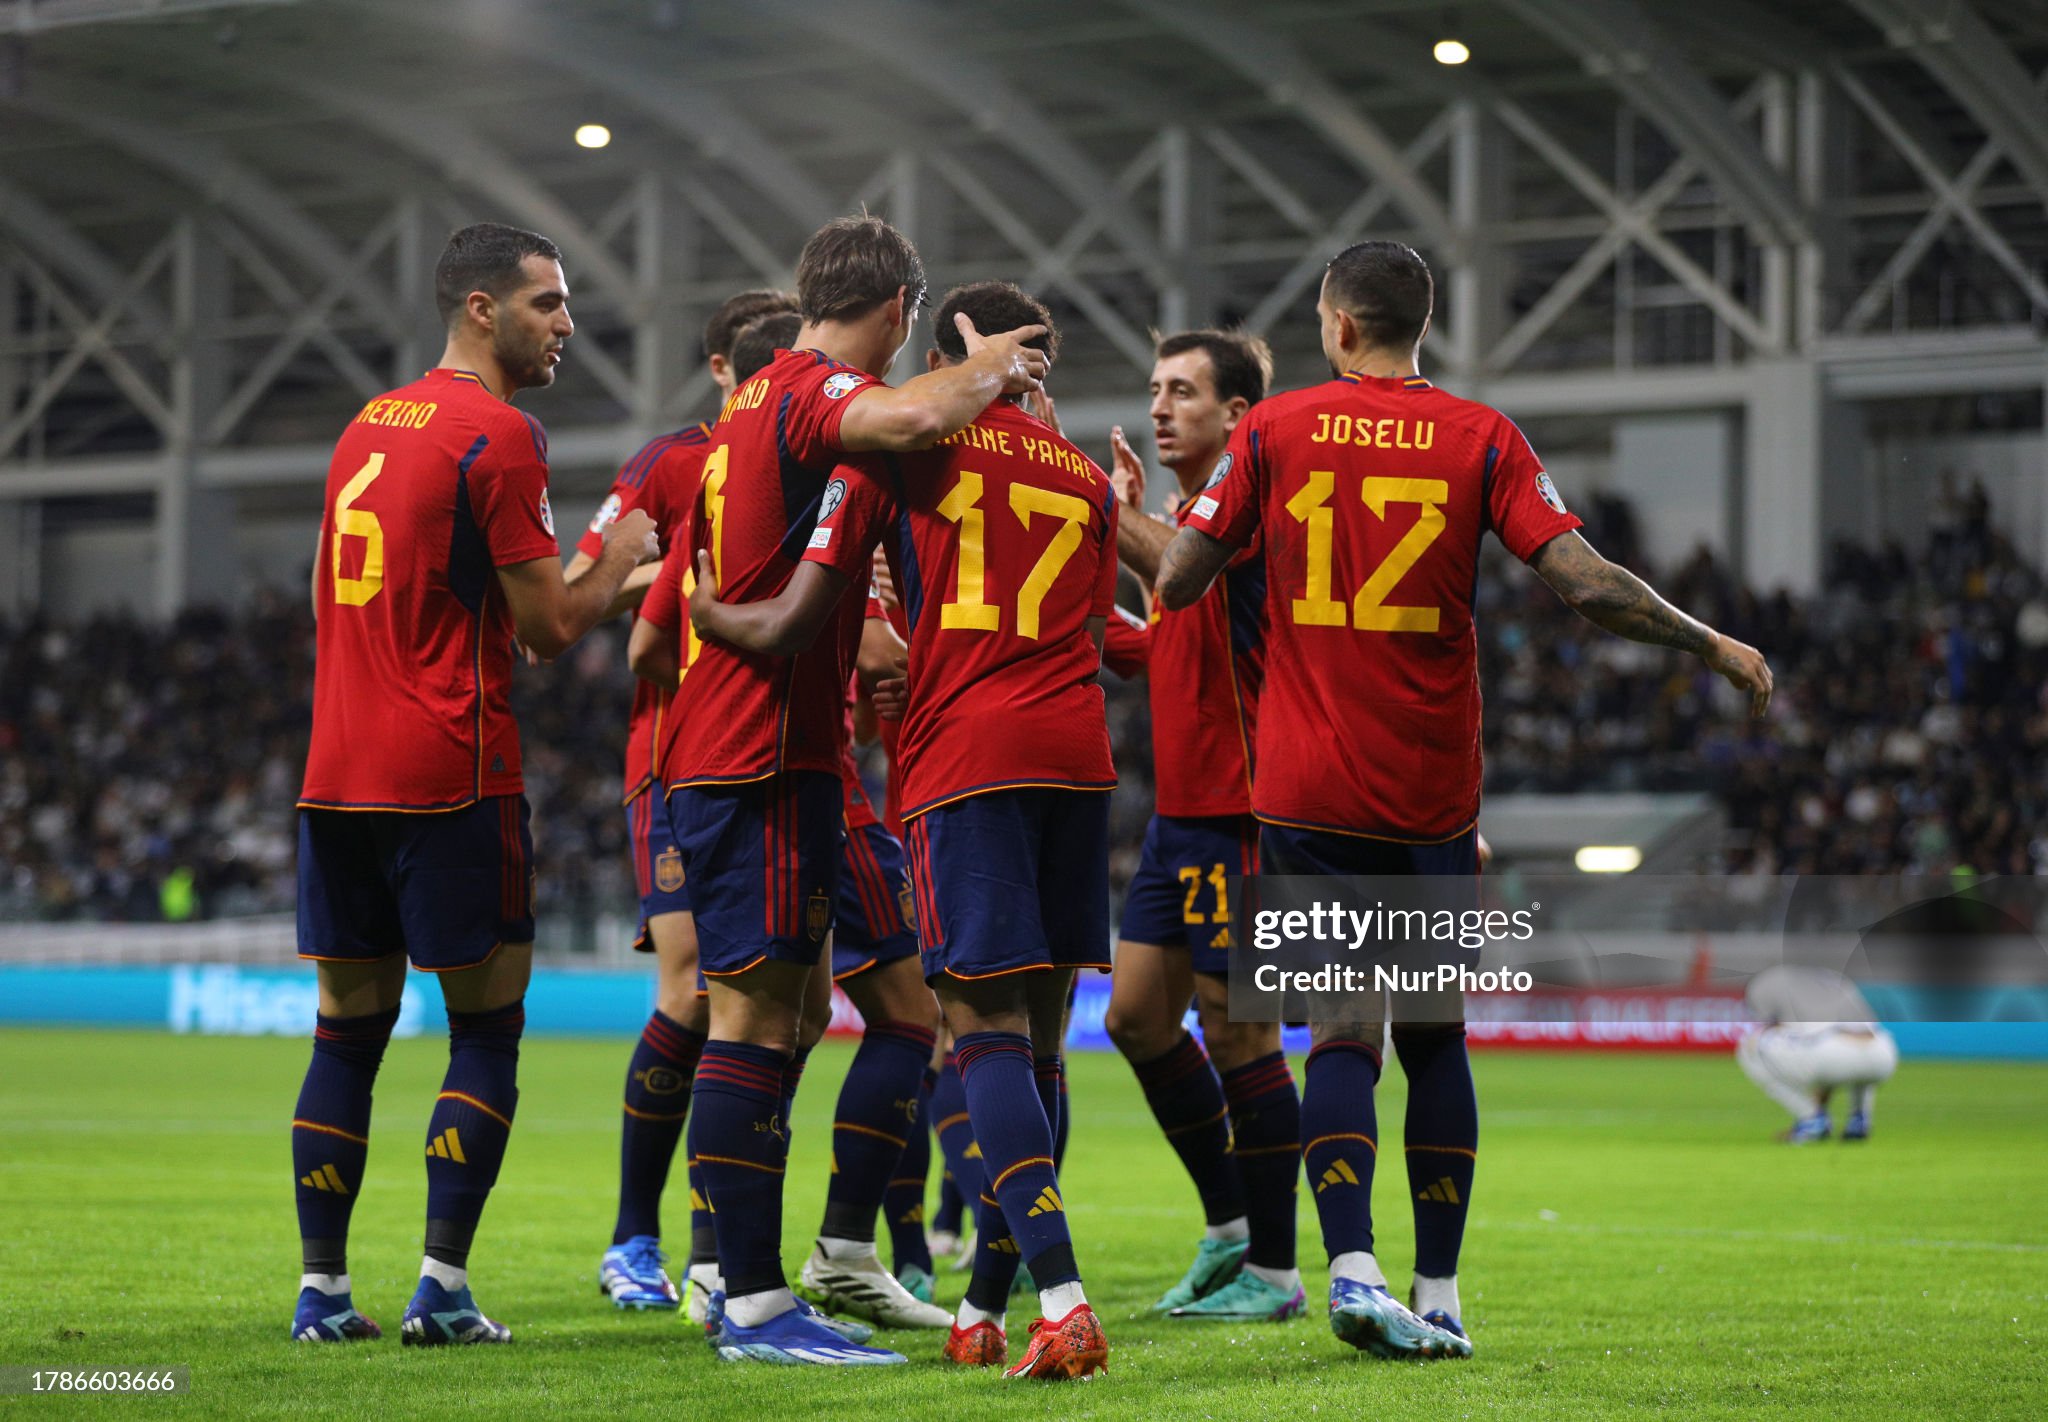 Spain shakes off Scotland, Hungary qualifies with late goal